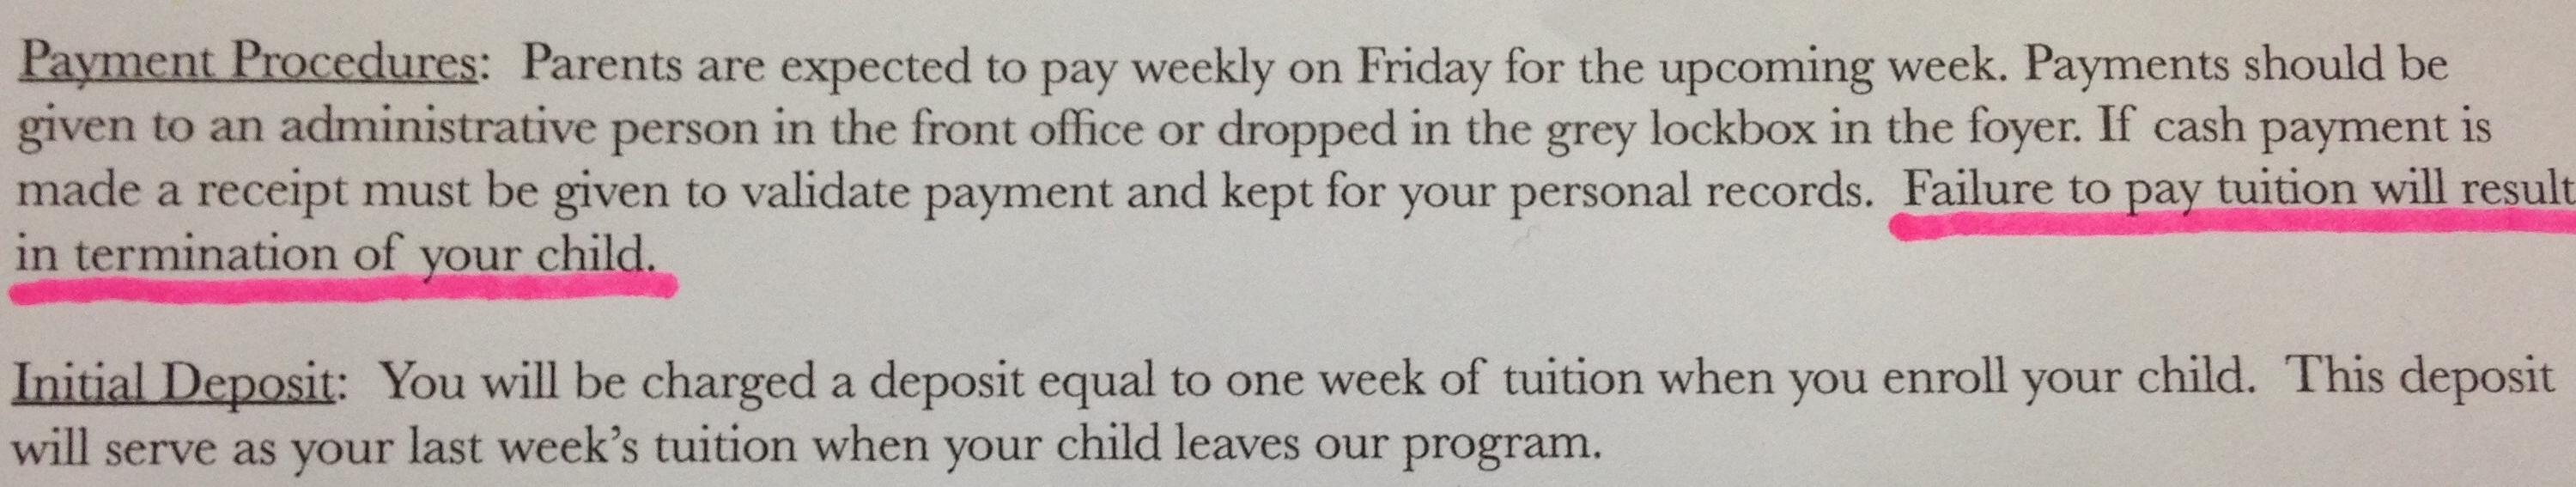 My son's new daycare isn't fucking around with payment - Imgur